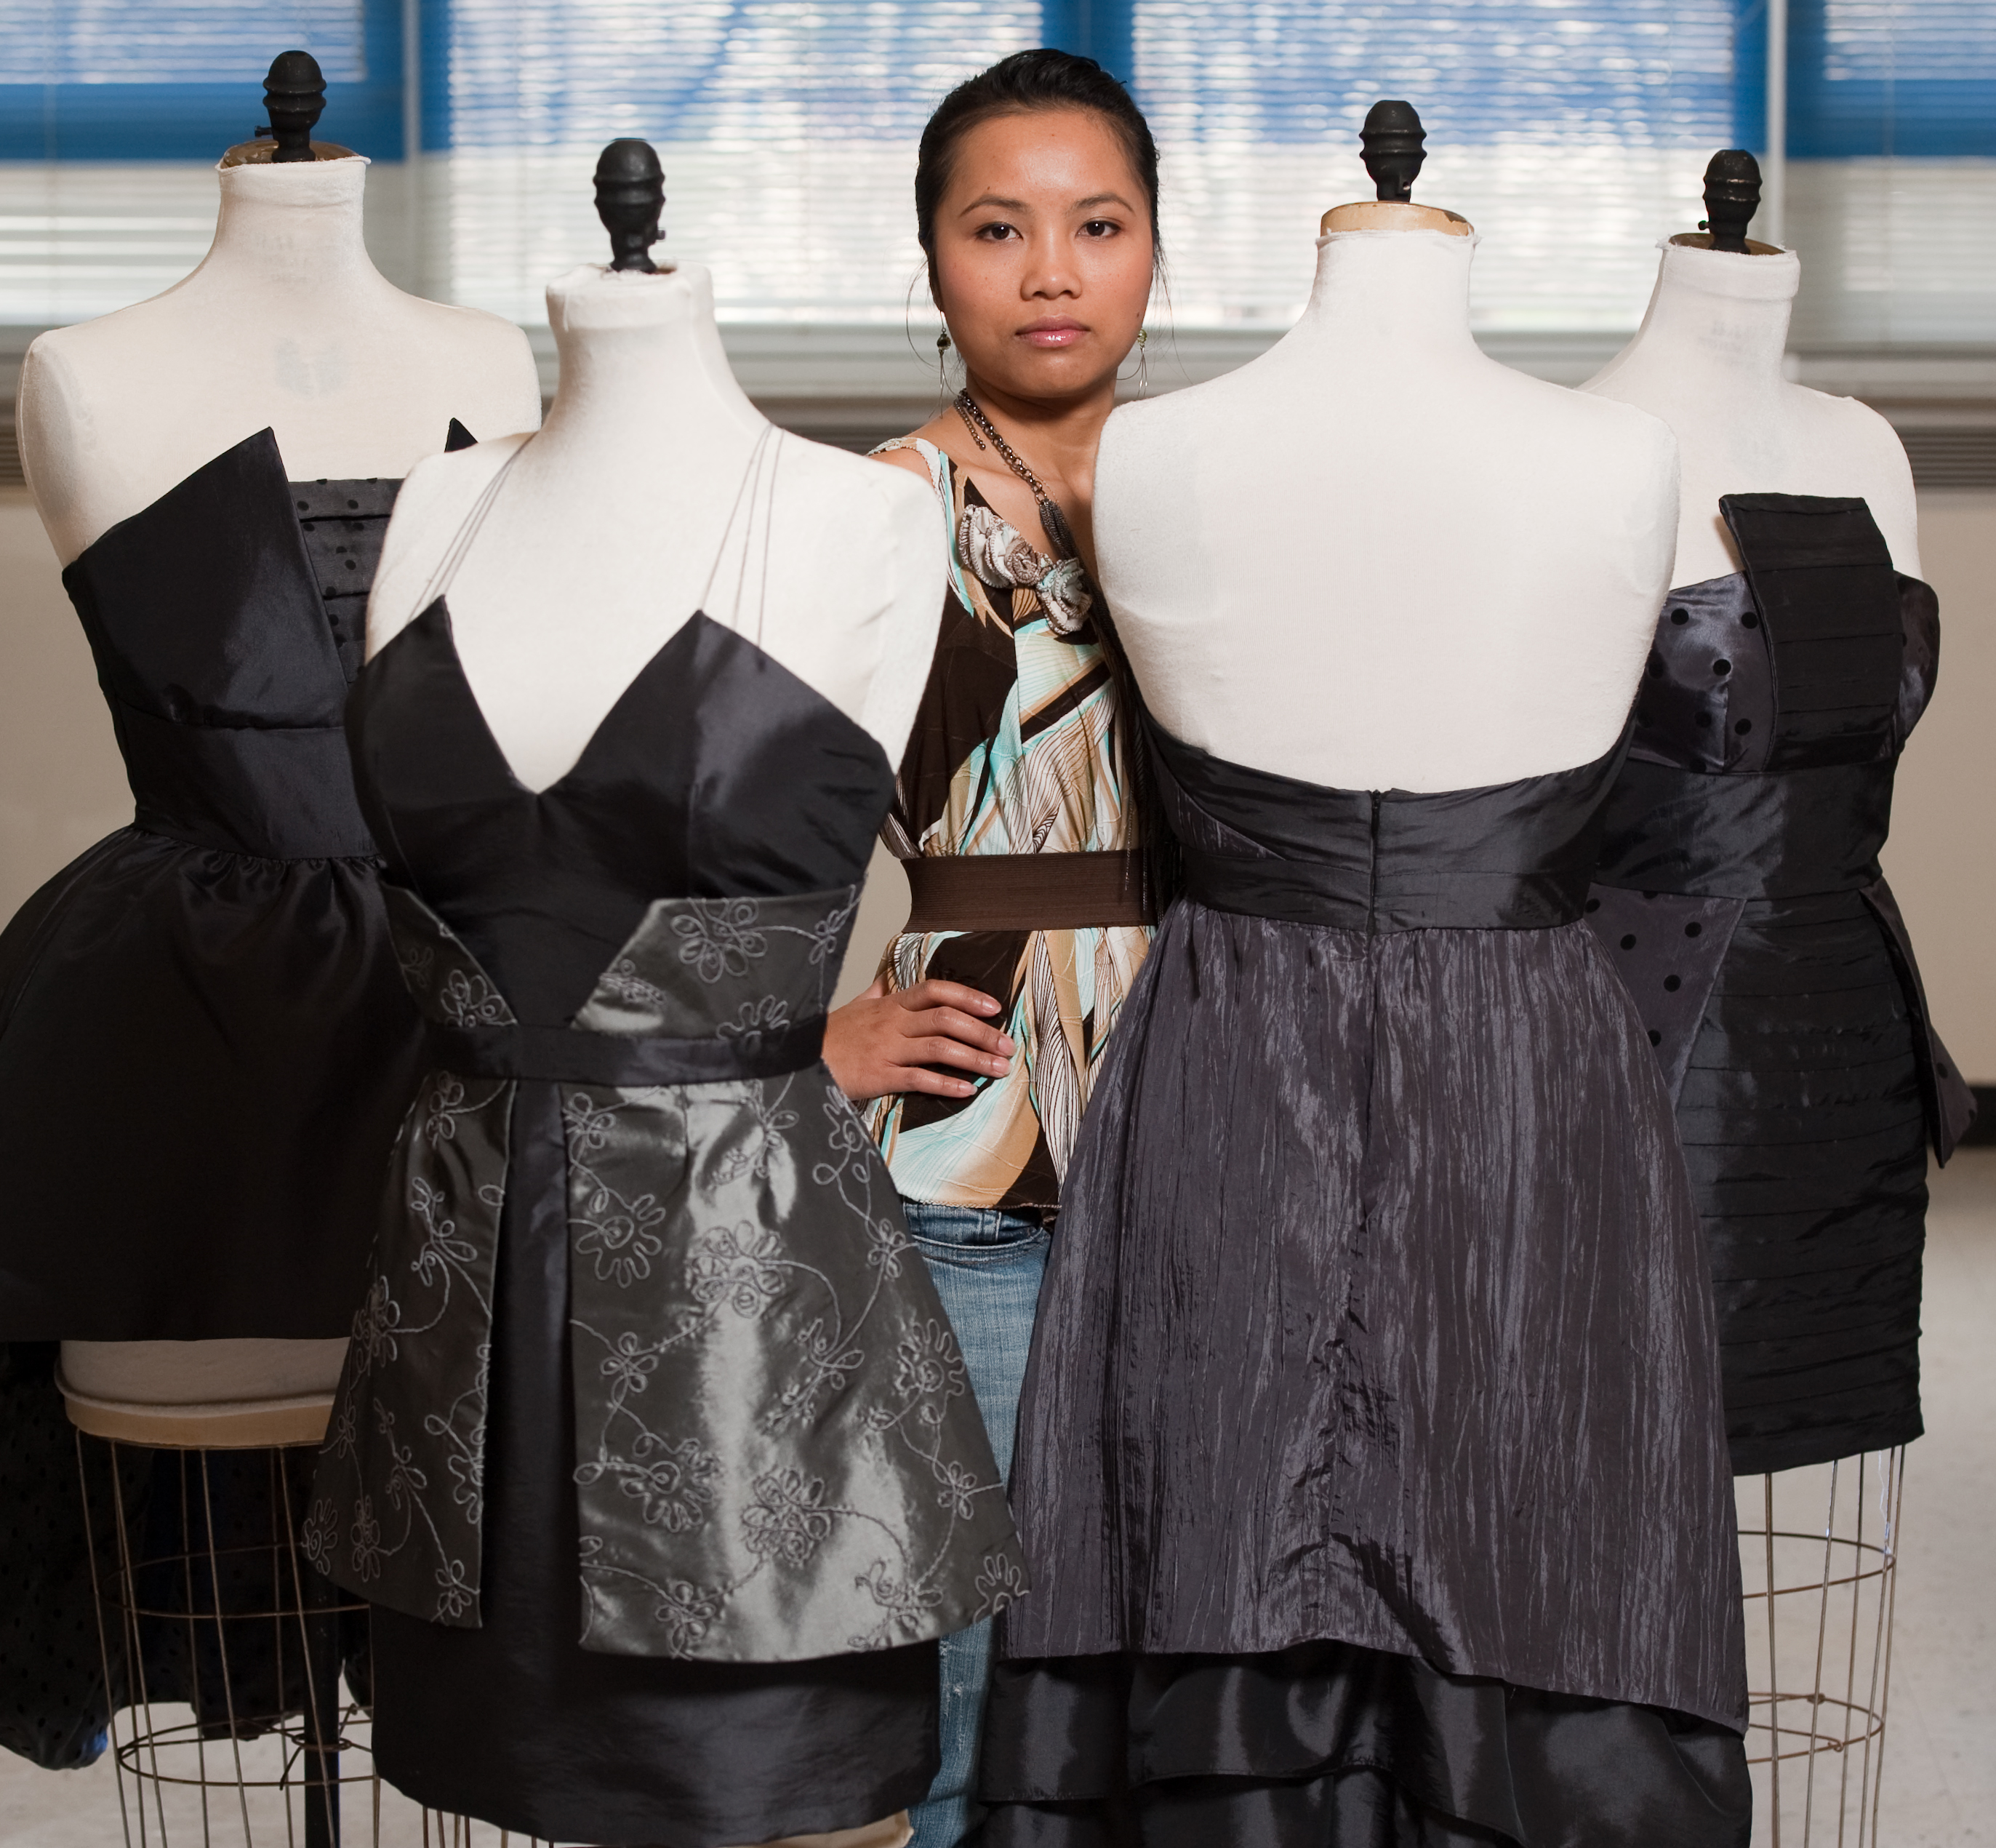 Designing a career: Student fashions her first collection